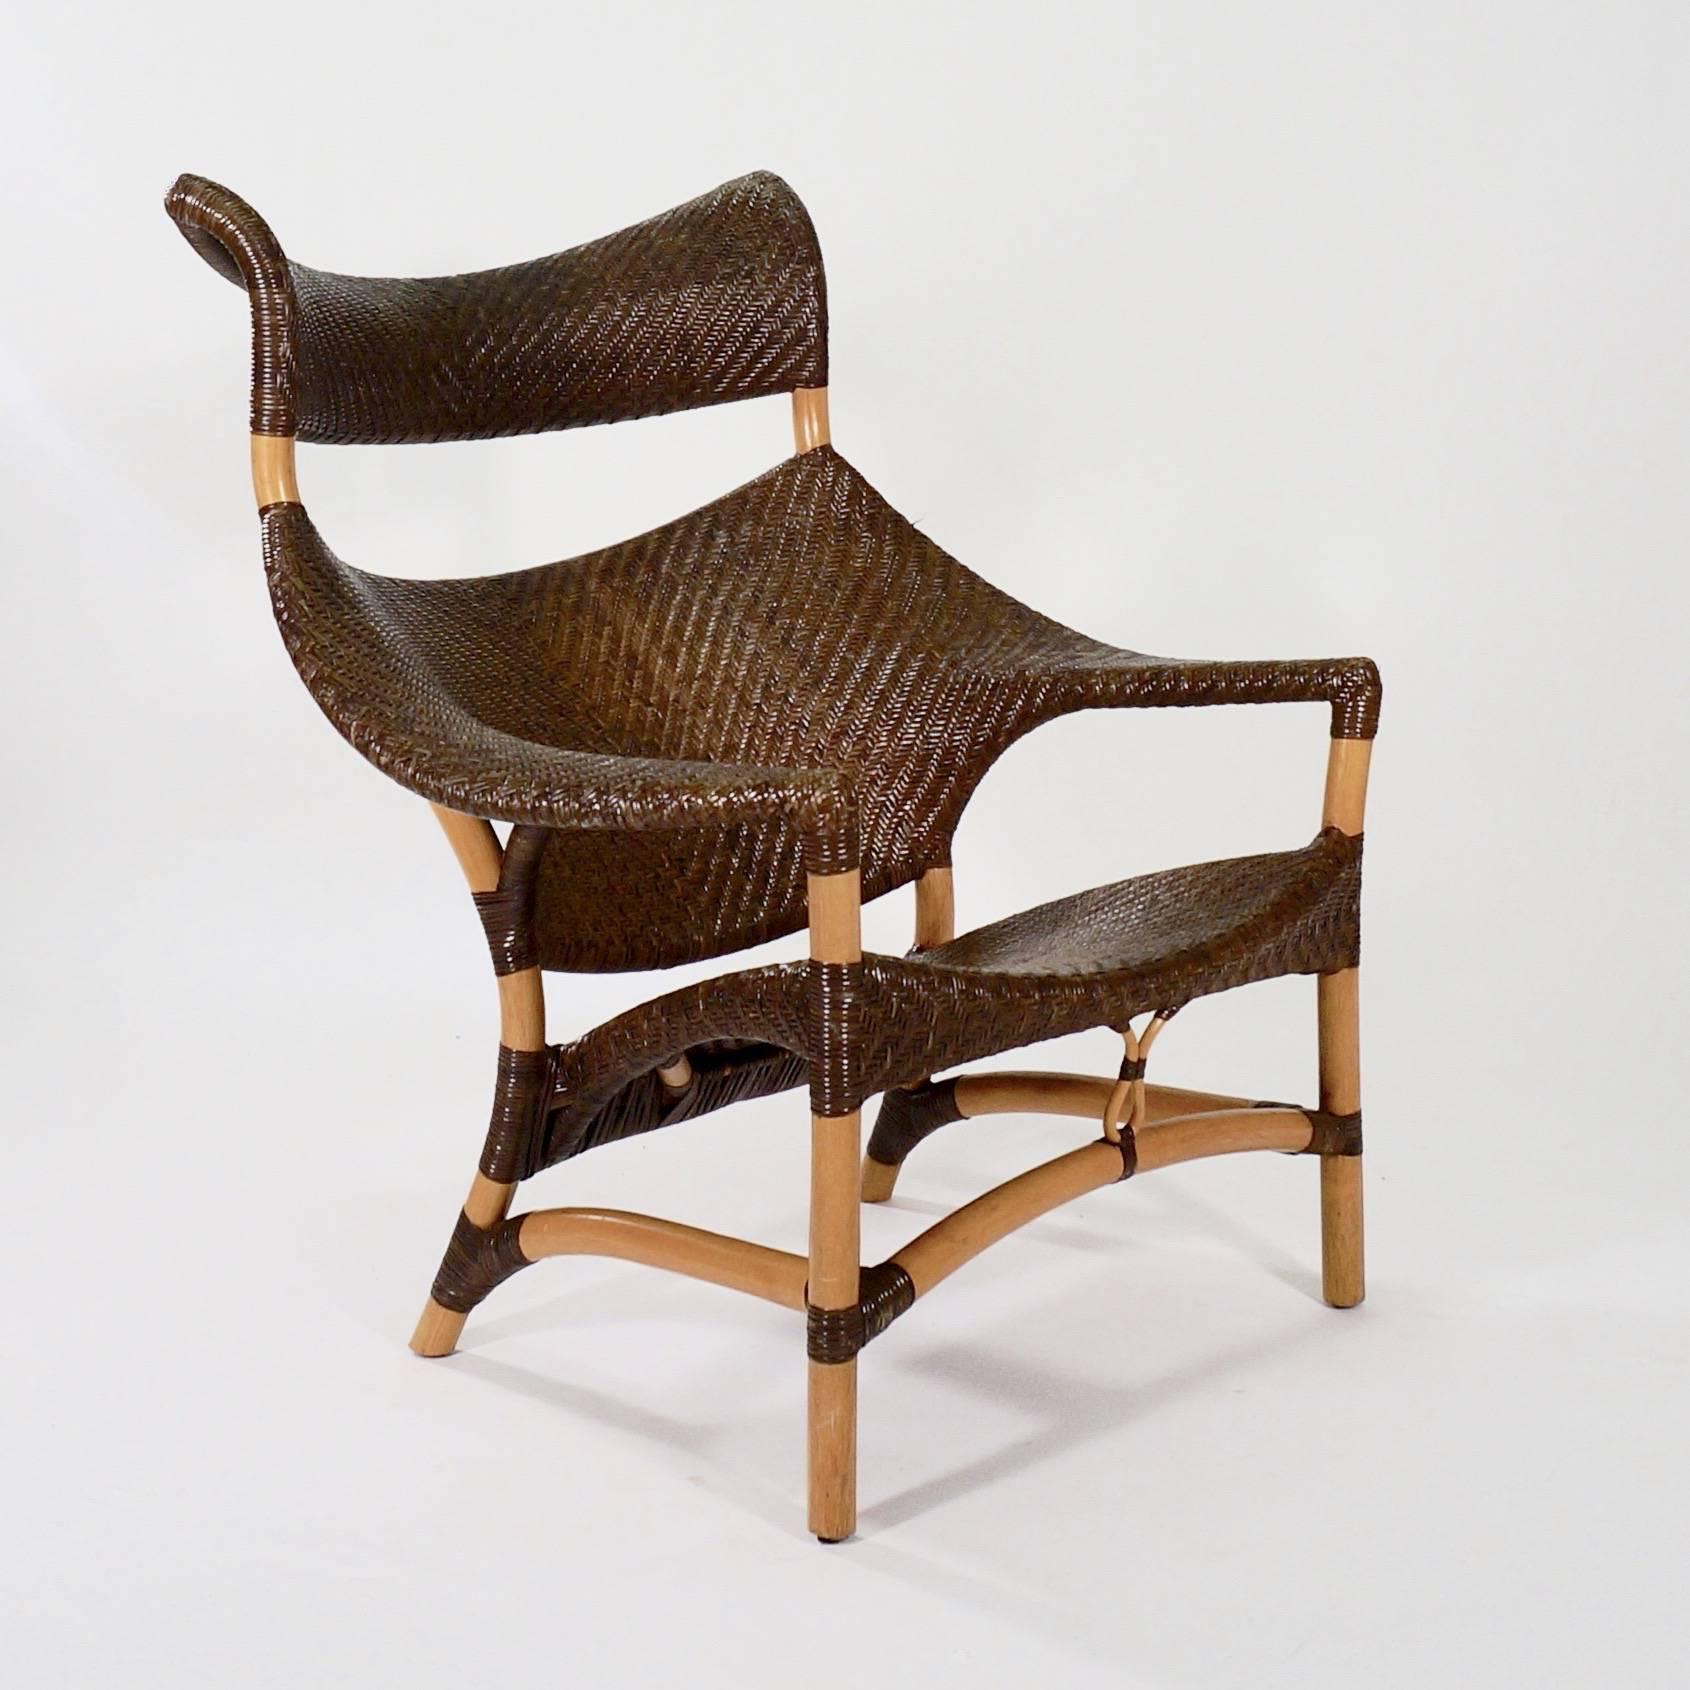 A pair of CL-261 woven rattan chairs.

Japan, circa 1980s.

Yuzru Yamakawa joined the family rattan furniture business at its inception in the 1950s. A gifted designer, he led the company's development, producing high quality prize-winning